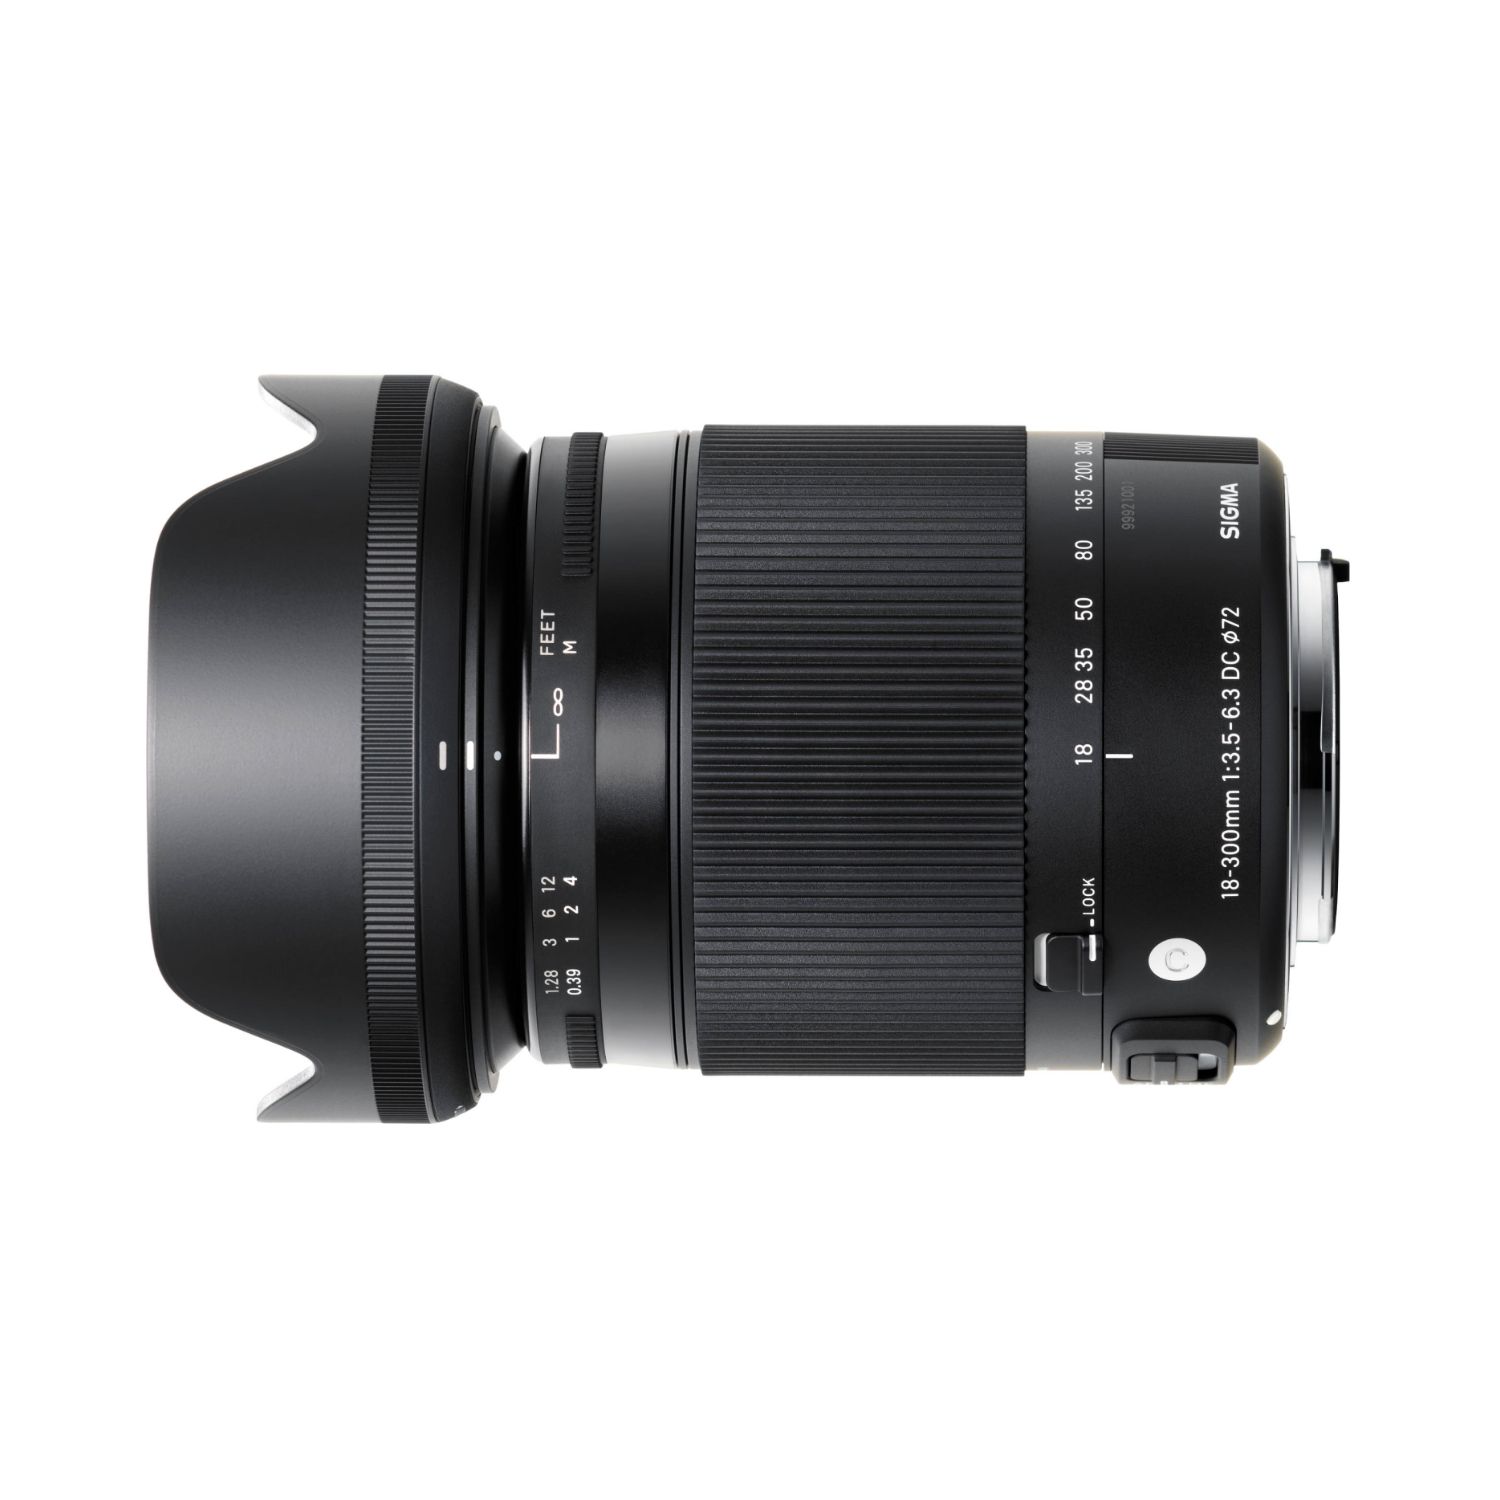 Sigma 18-300mm f/3.5-6.3 DC Macro OS HSM Contemporary Lens for Canon